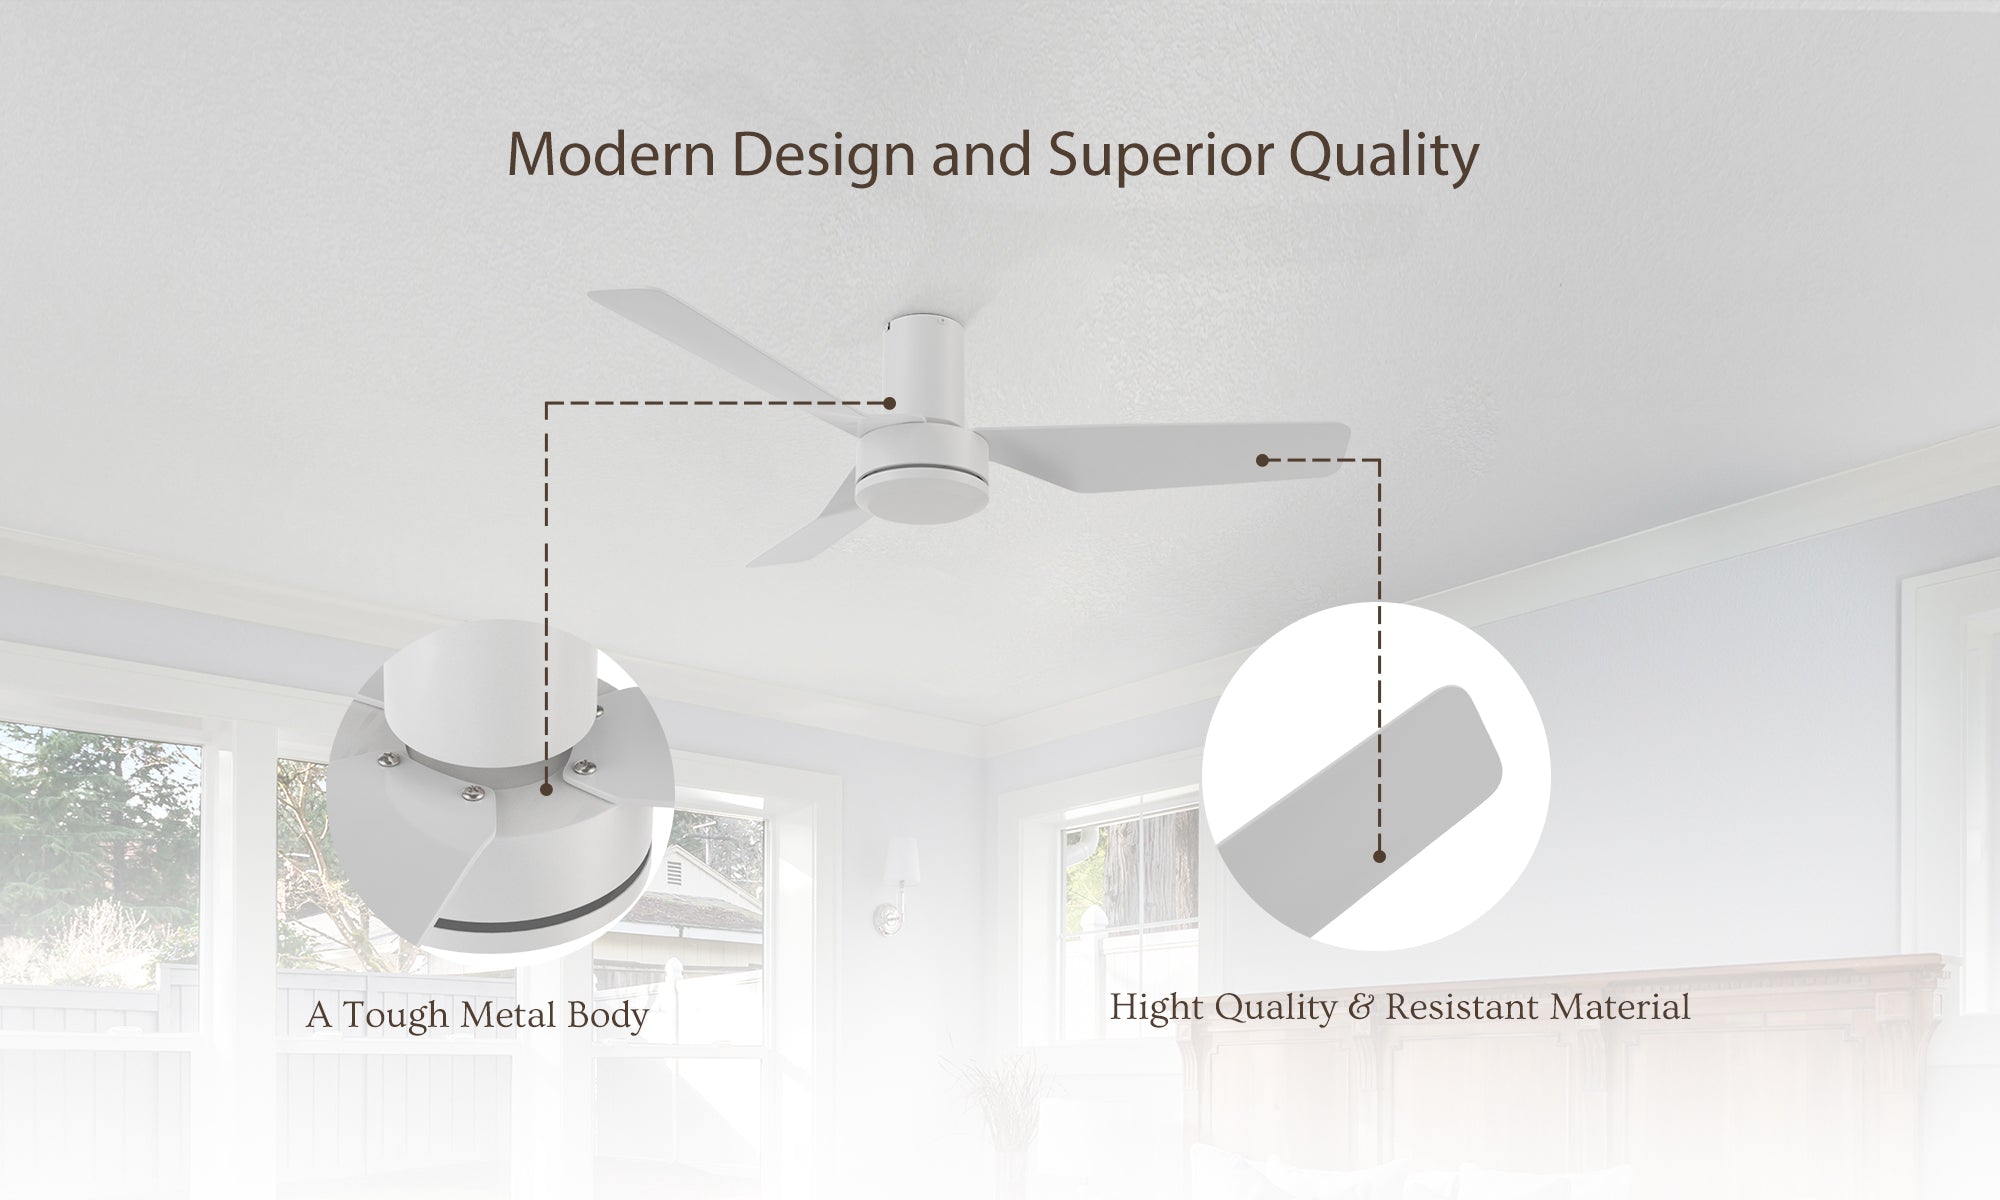 44-inch white ceiling fan with a tough metal body and high quality ABS blades.